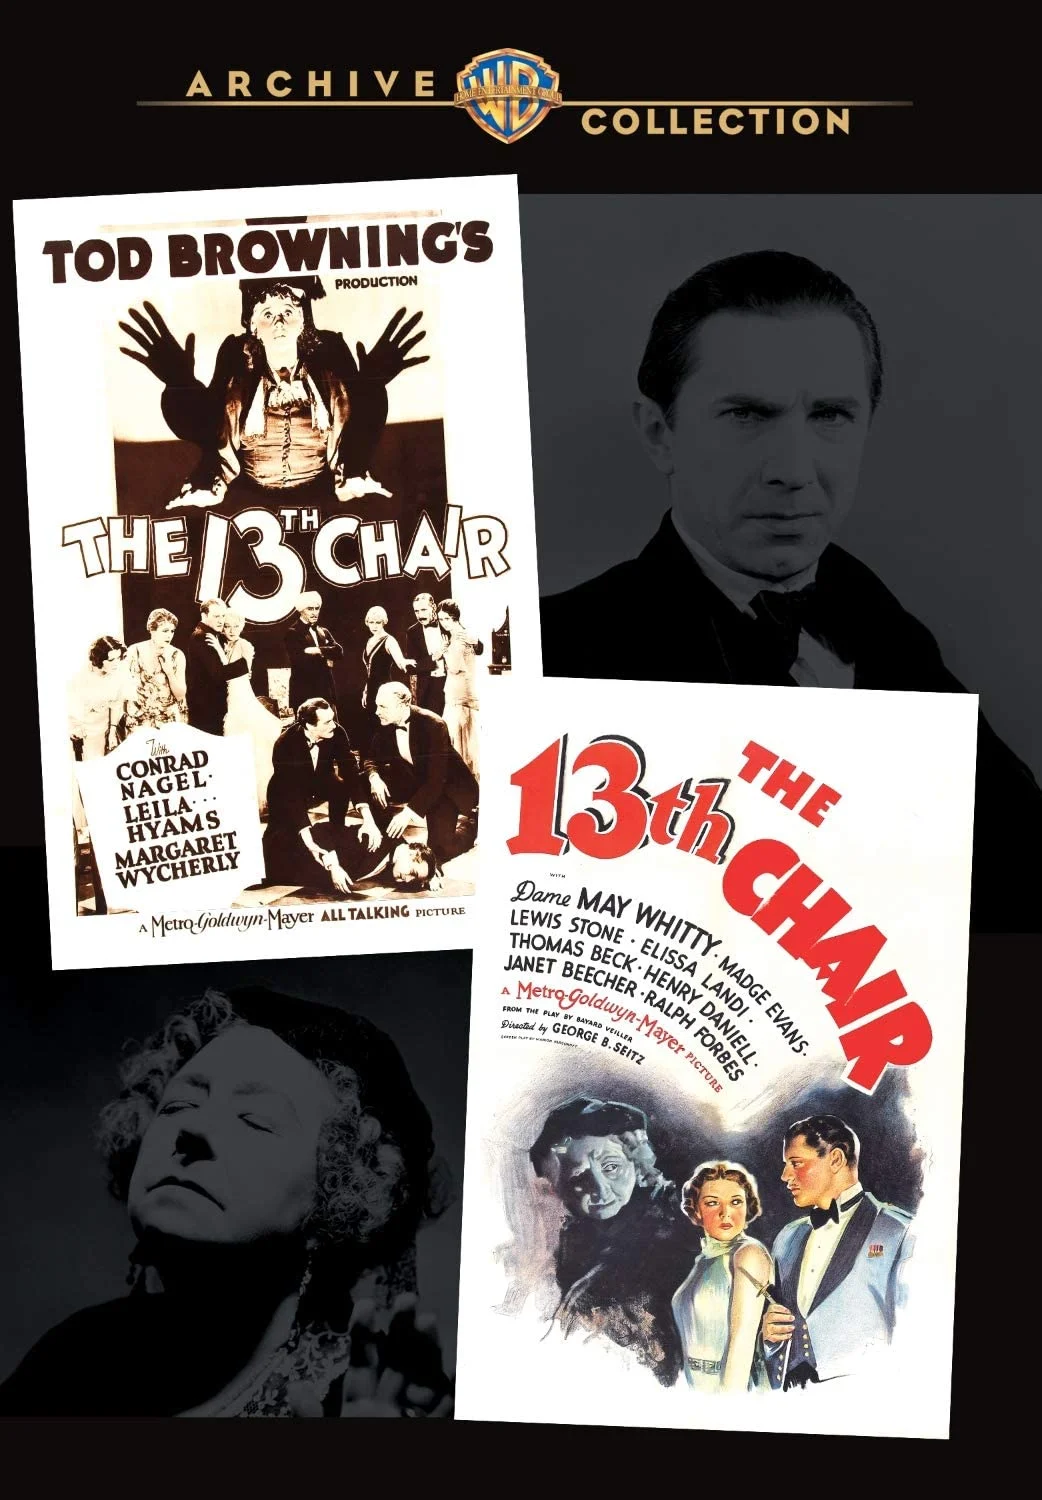 Thirteenth Chair: Double Feature (DVD) (MOD) on MovieShack